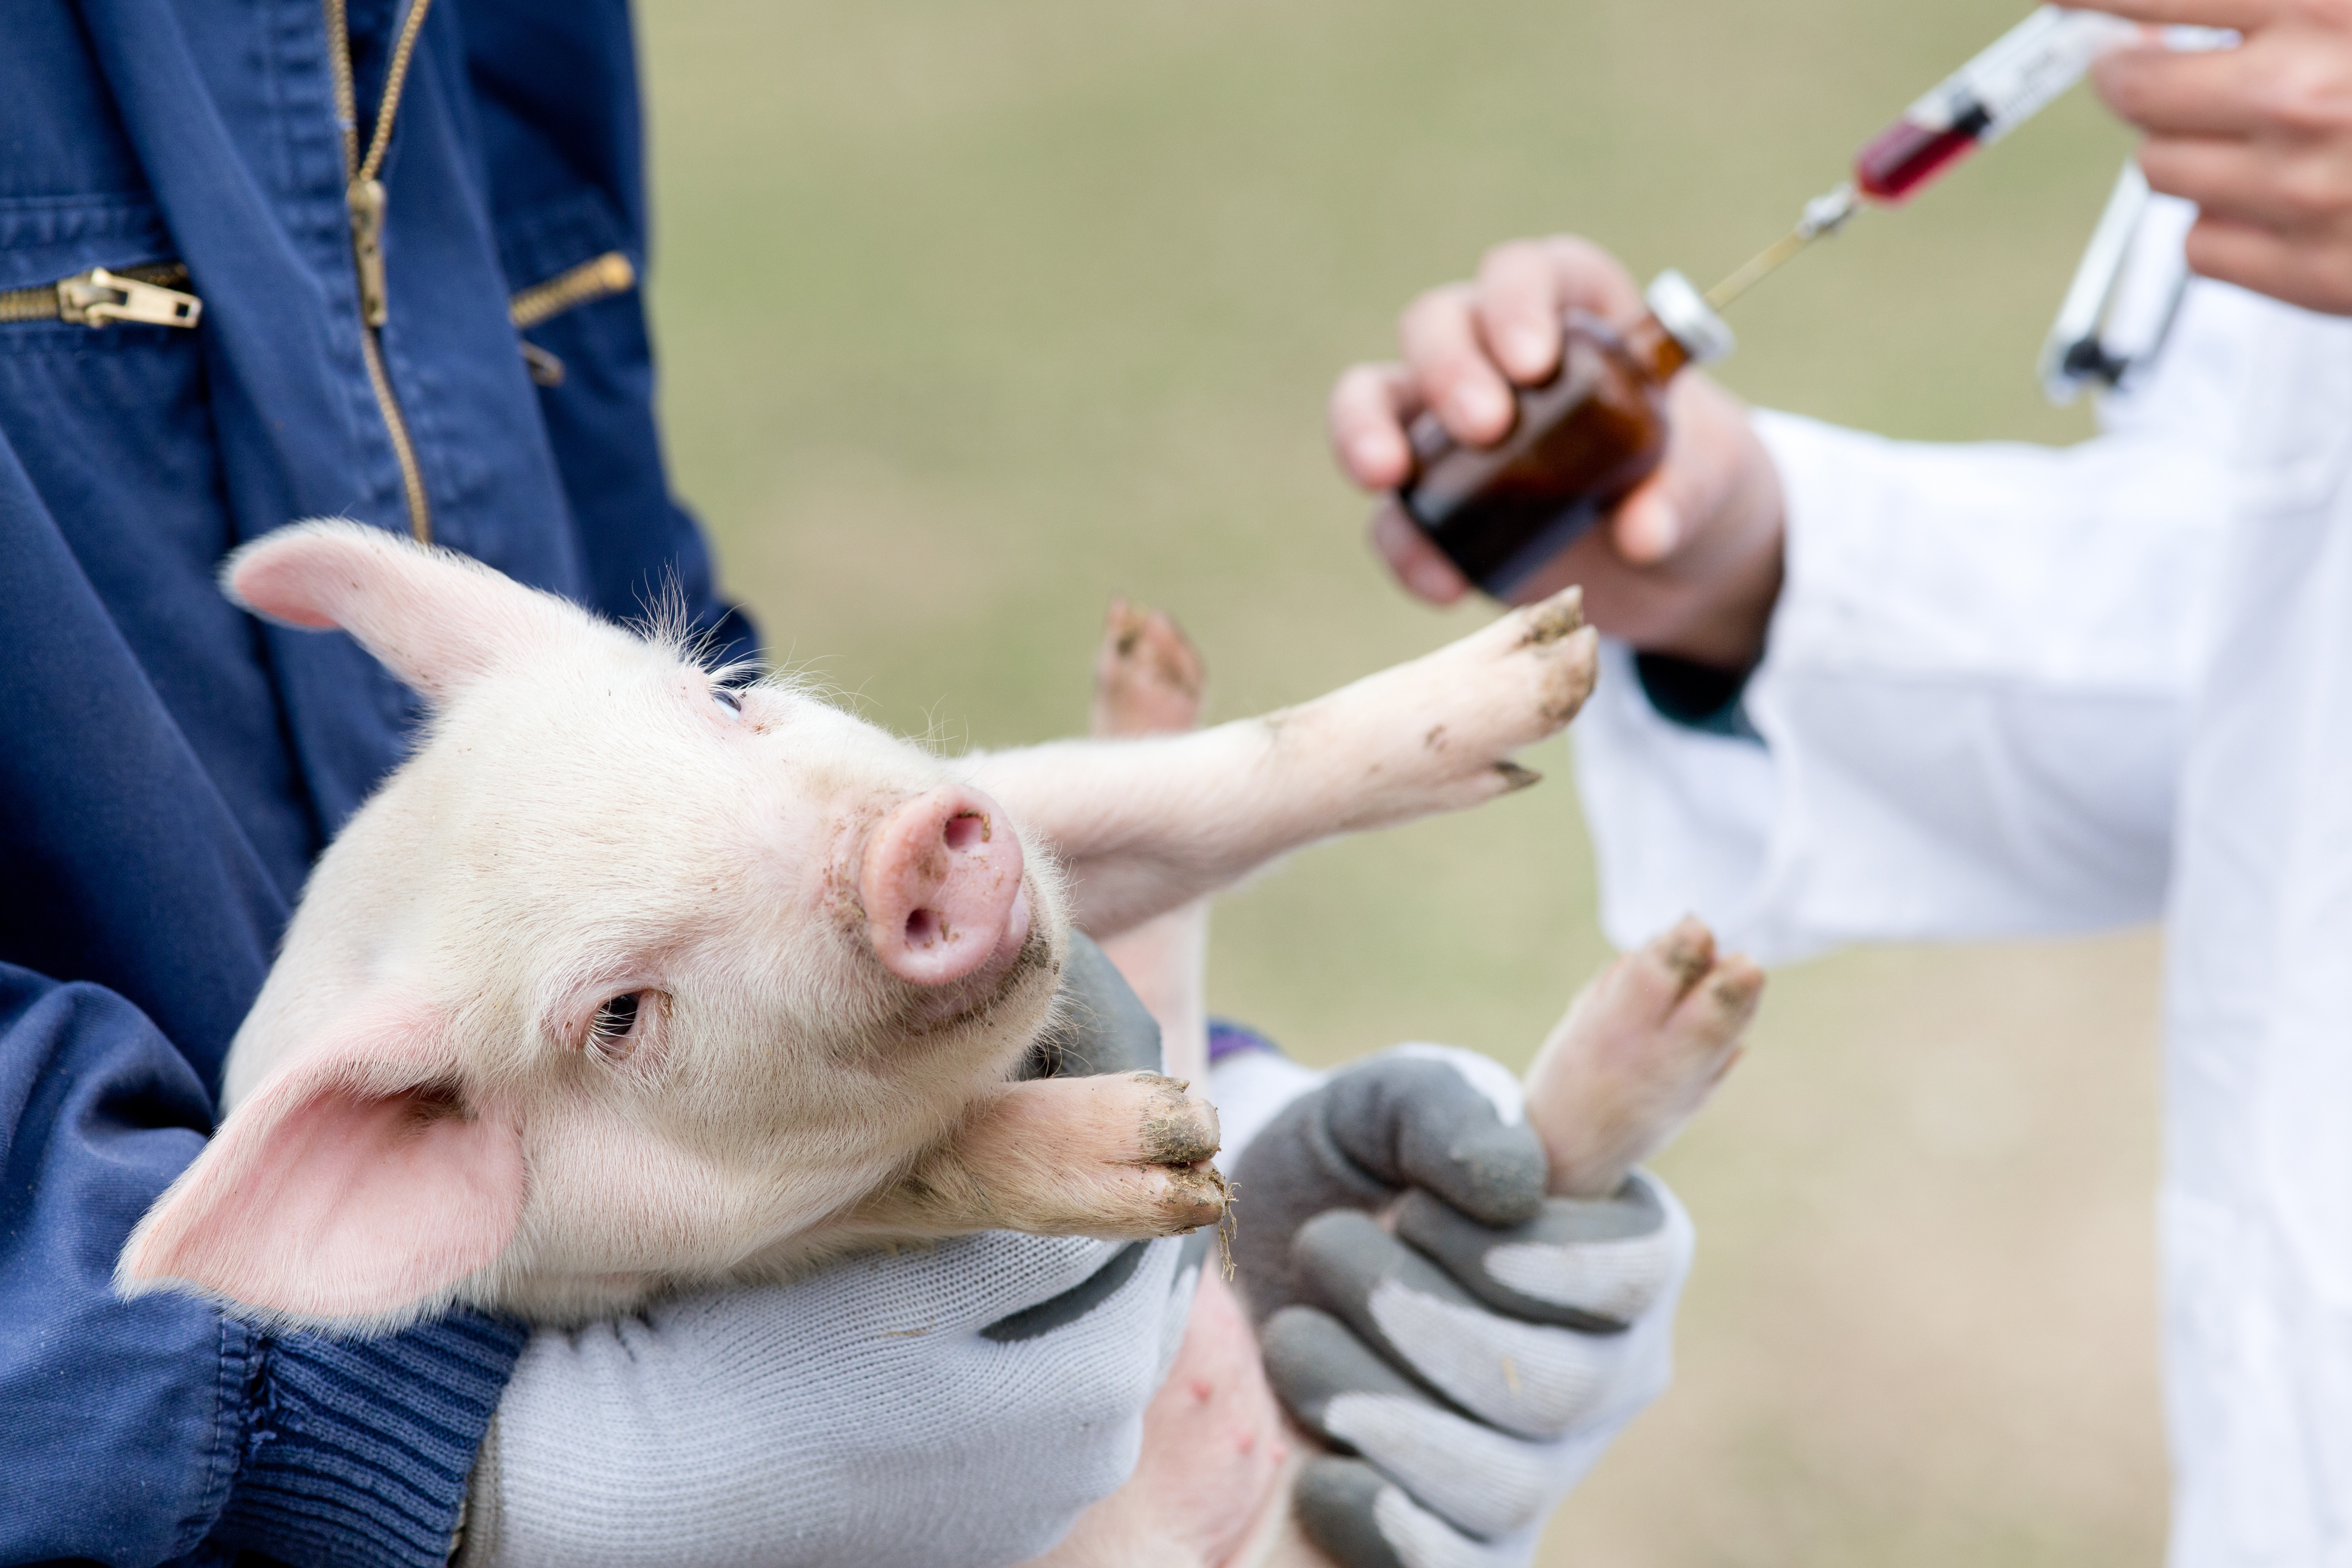 vet holding a needle and syringe vaccinating a piglet